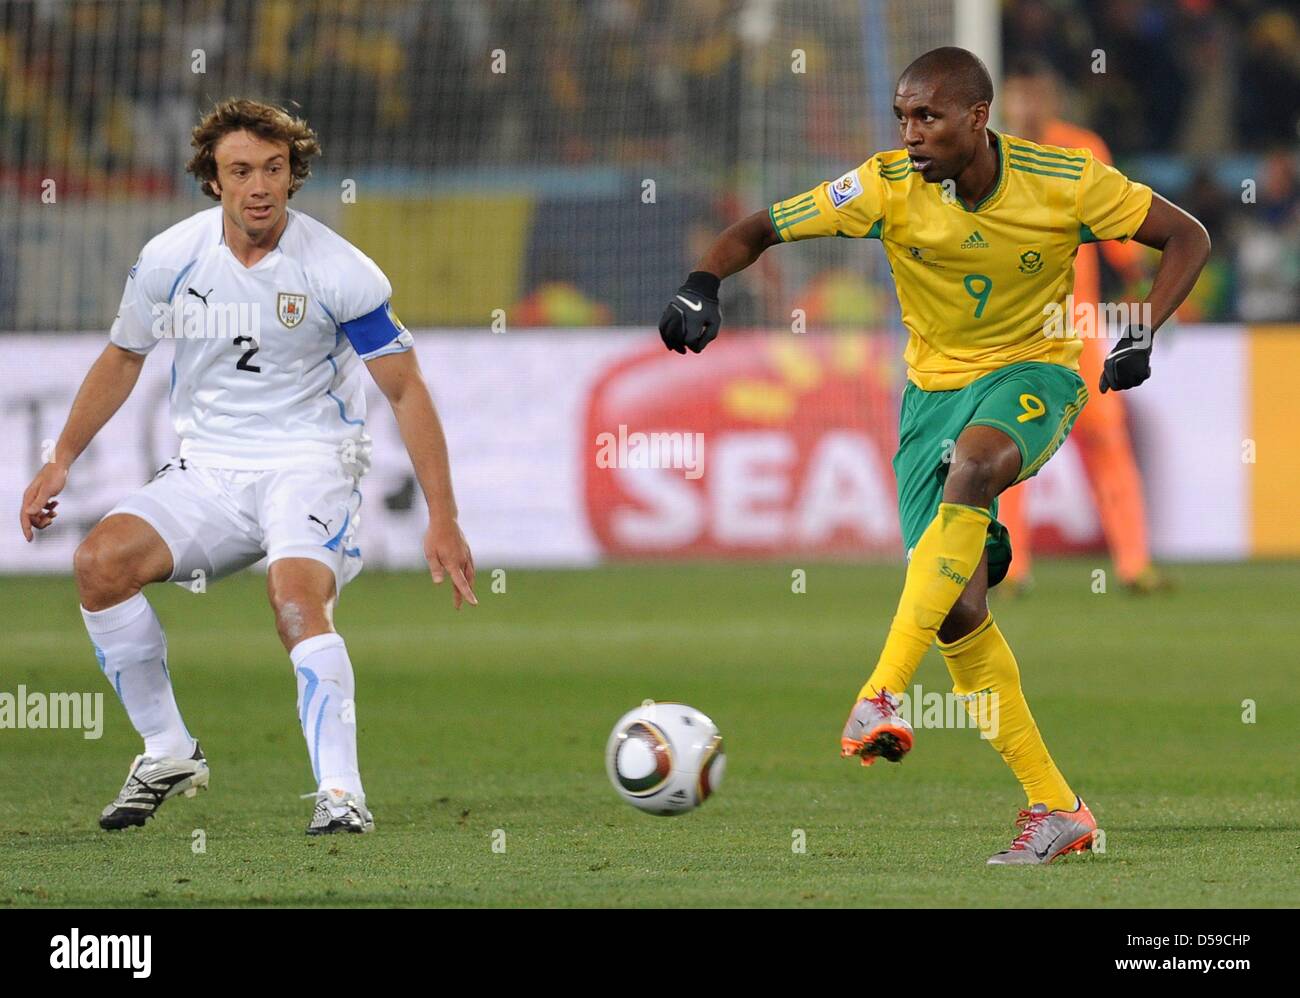 Uruguay's Diego Lugano (L) in action against South Africa's Katlego Mphela during the 2010 FIFA World Cup group A match between South Africa and Uruguay at Loftus Versfeld Stadium in Pretoria, South Africa 16 June 2010. Photo: Achim Scheidemann - Please refer to http://dpaq.de/FIFA-WM2010-TC Stock Photo